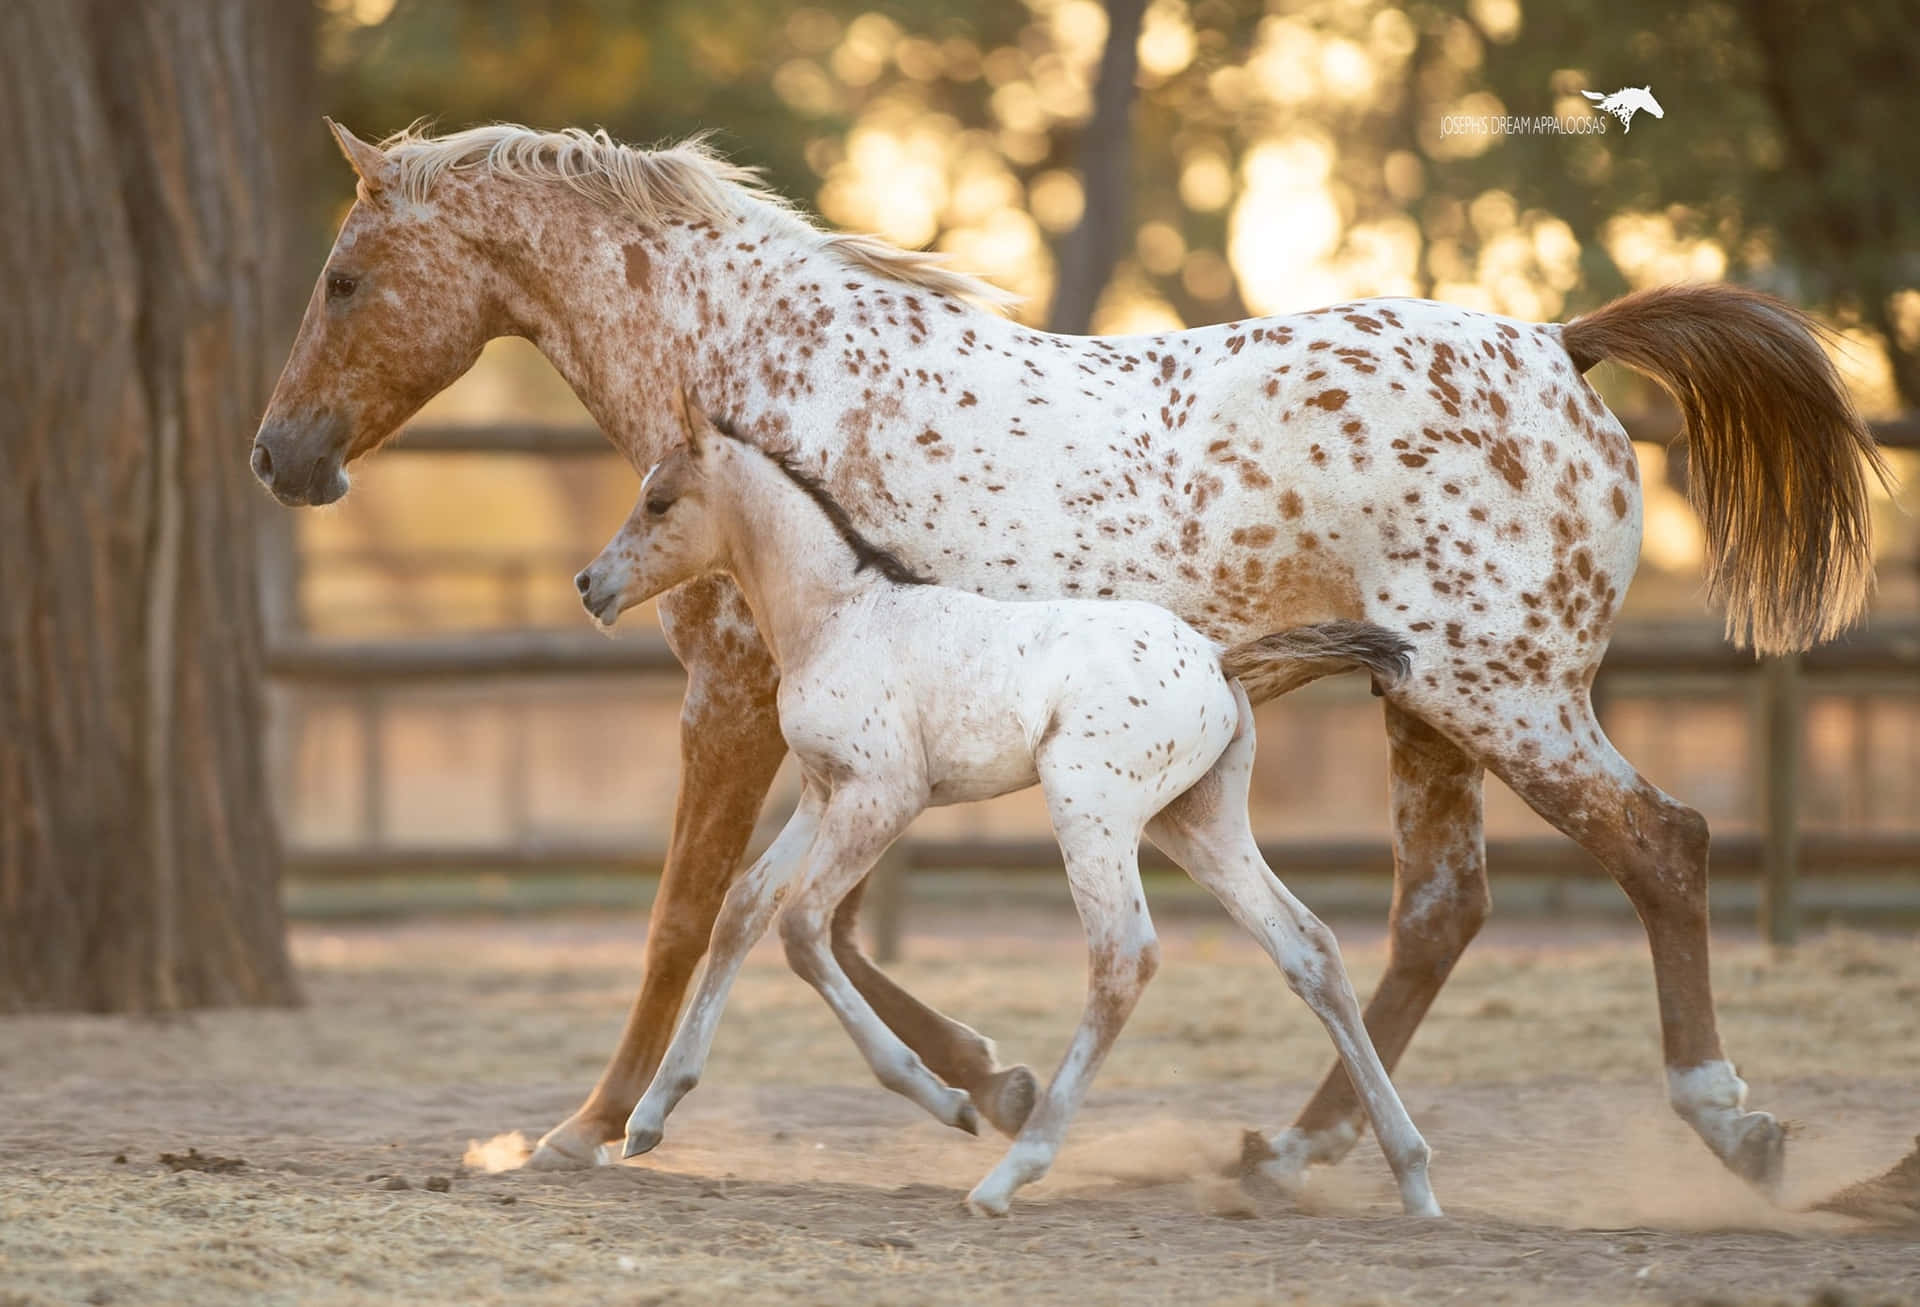 A Horse And Her Foal Walking In A Dirt Field